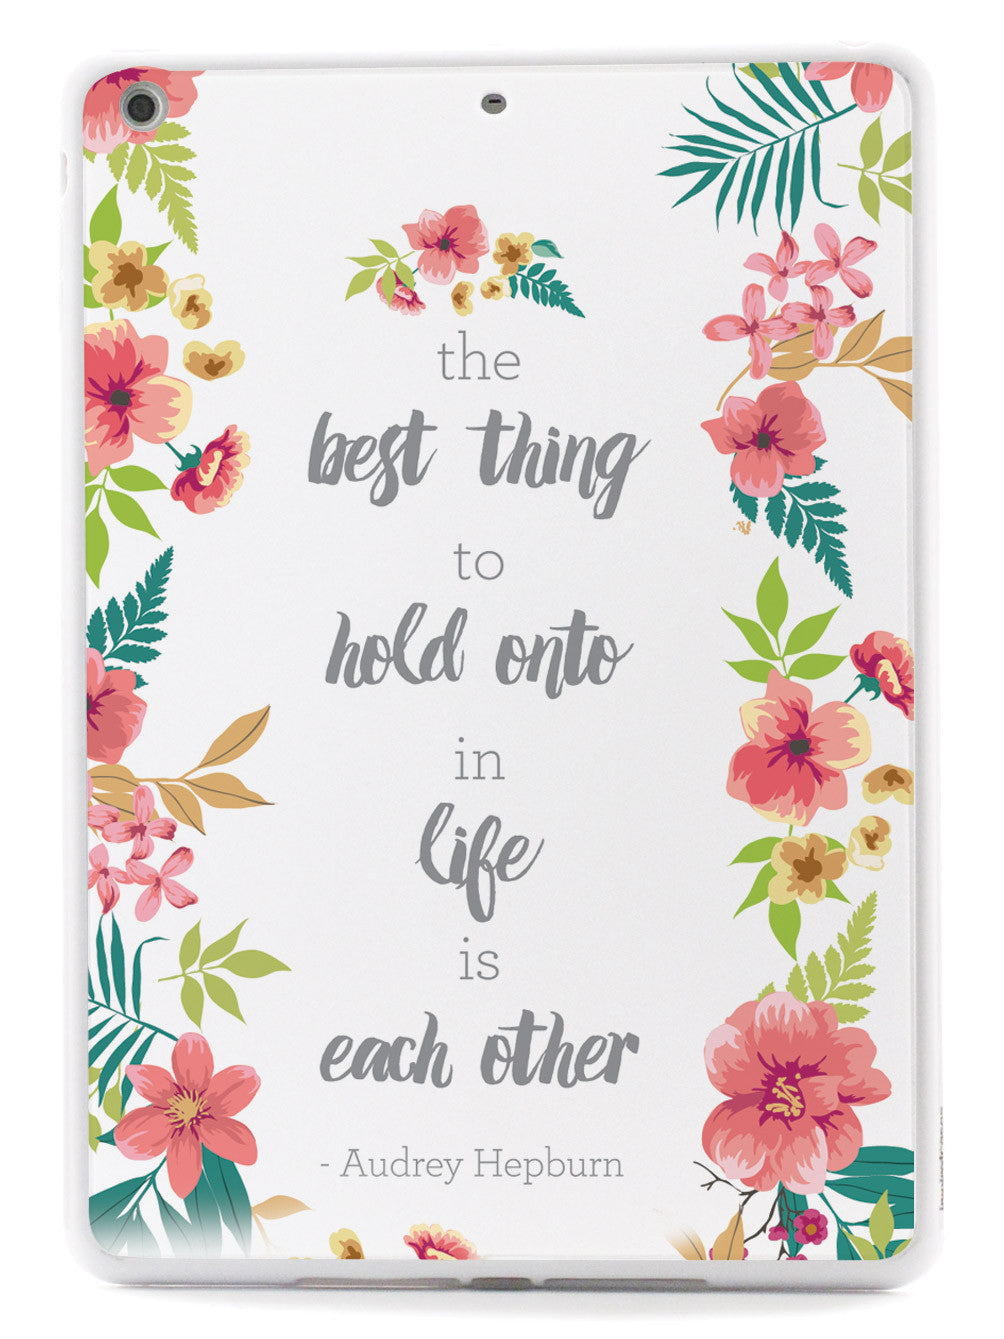 The Best Thing In Life - Audrey Hepburn Case